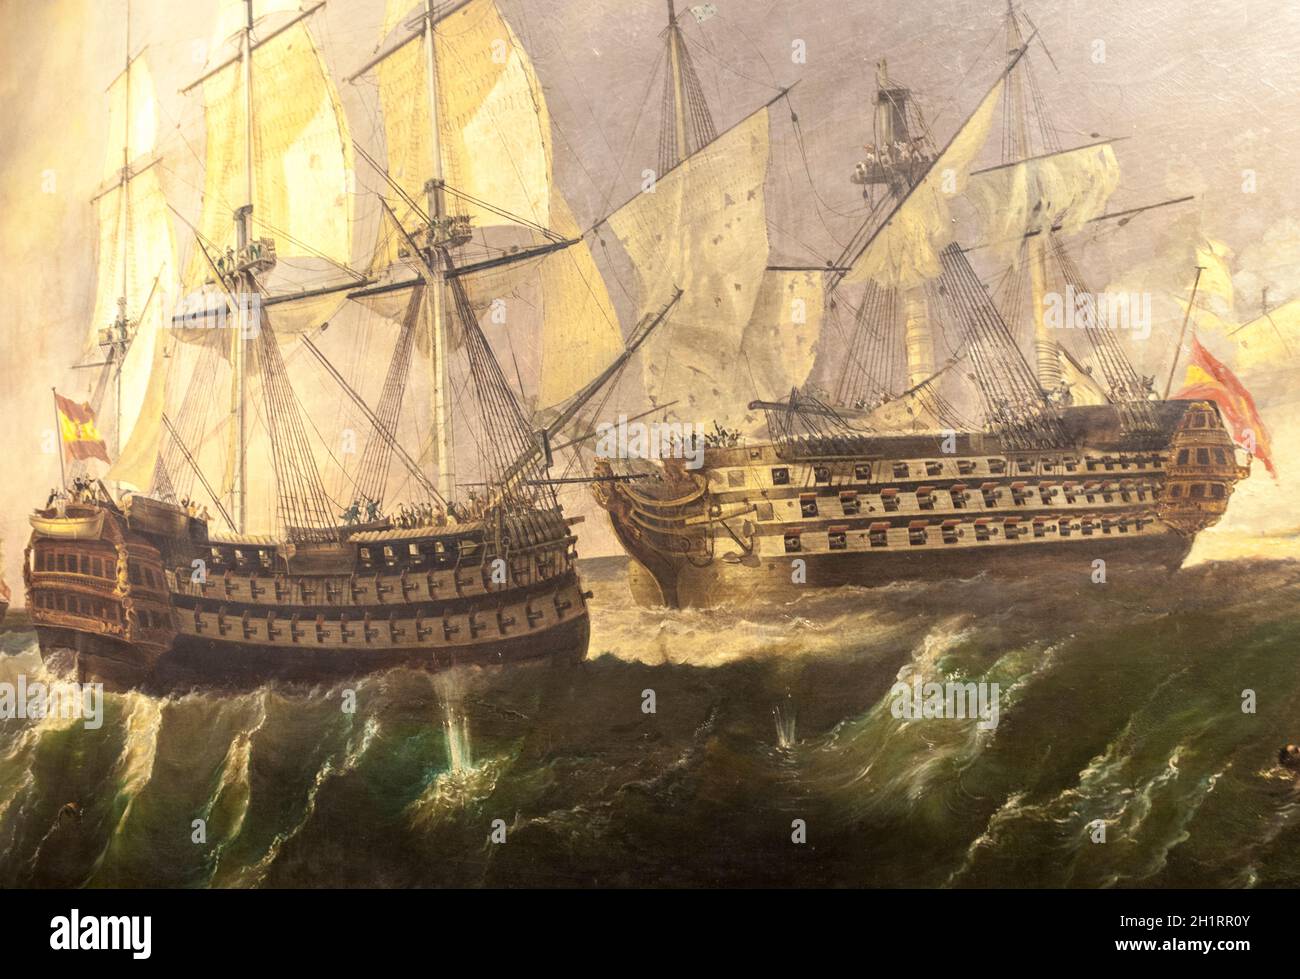 Battle of Cape St. Vincent. Ship Pelayo aids the ship Santisima Trinidad. Painted by Antonio Brugada in 1858. Museo Naval. Madrid. Spanish ships detai Stock Photo